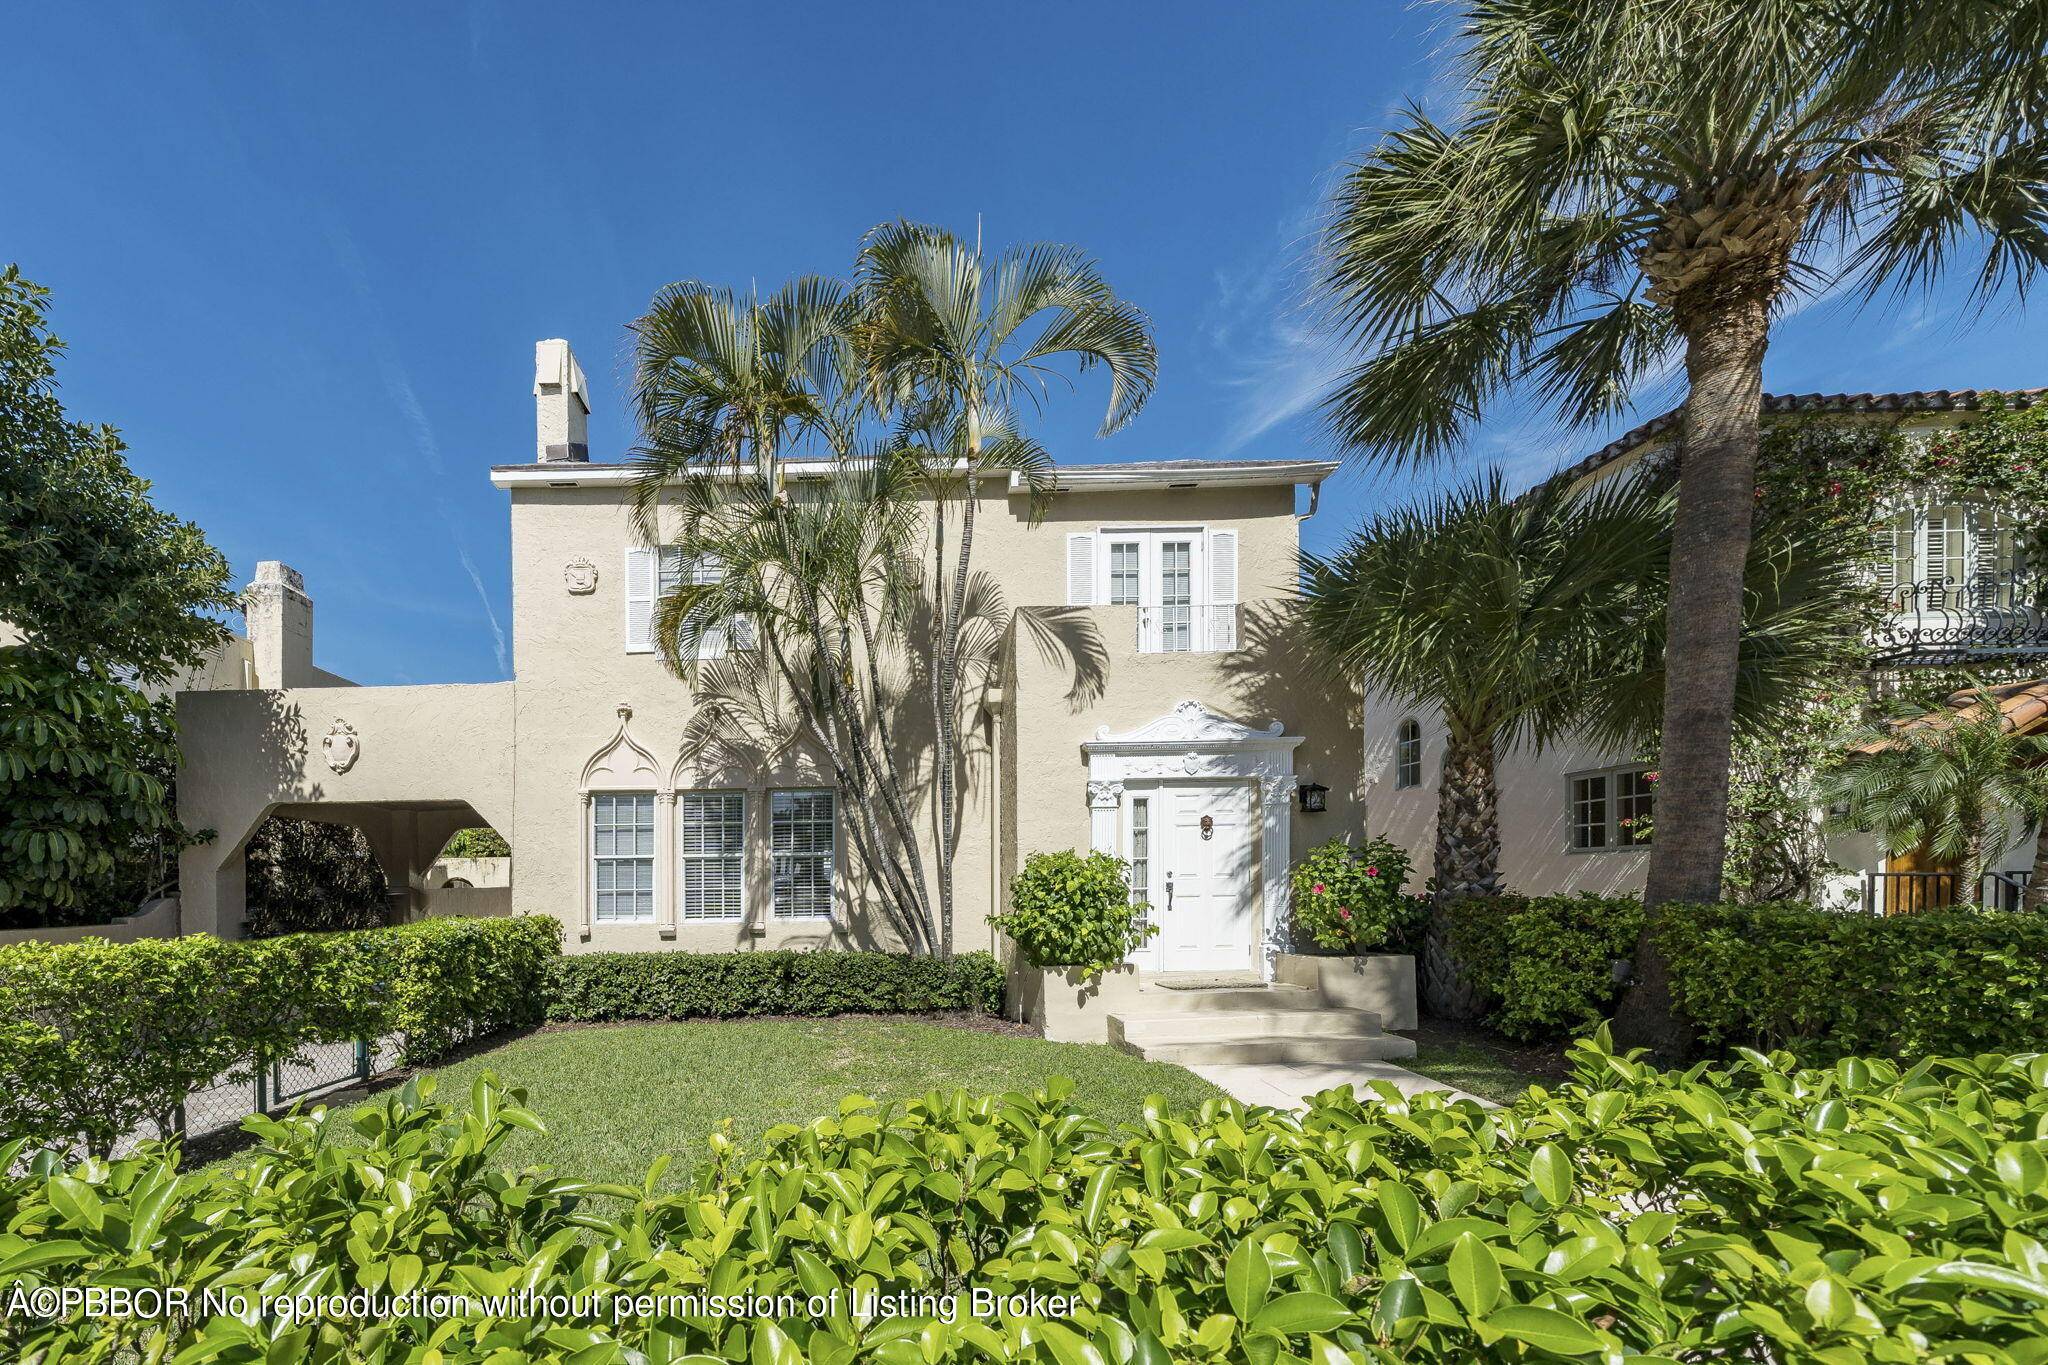 A wonderful, 1920's classic Palm Beach style home located in the highly desirable 'Sea Streets' with deeded beach access !